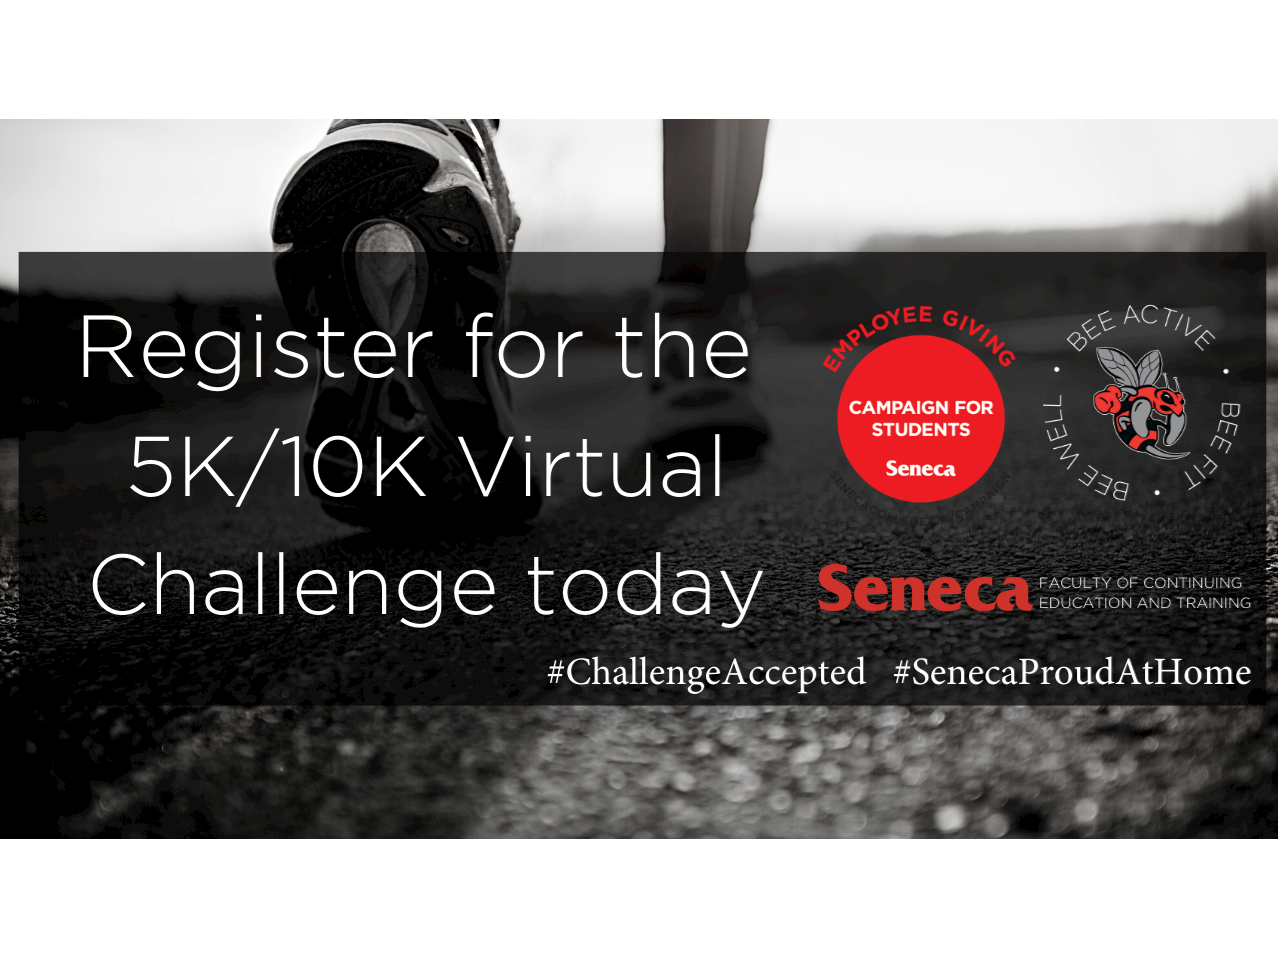 There is still time to register for the 5K/10K Virtual Challenge